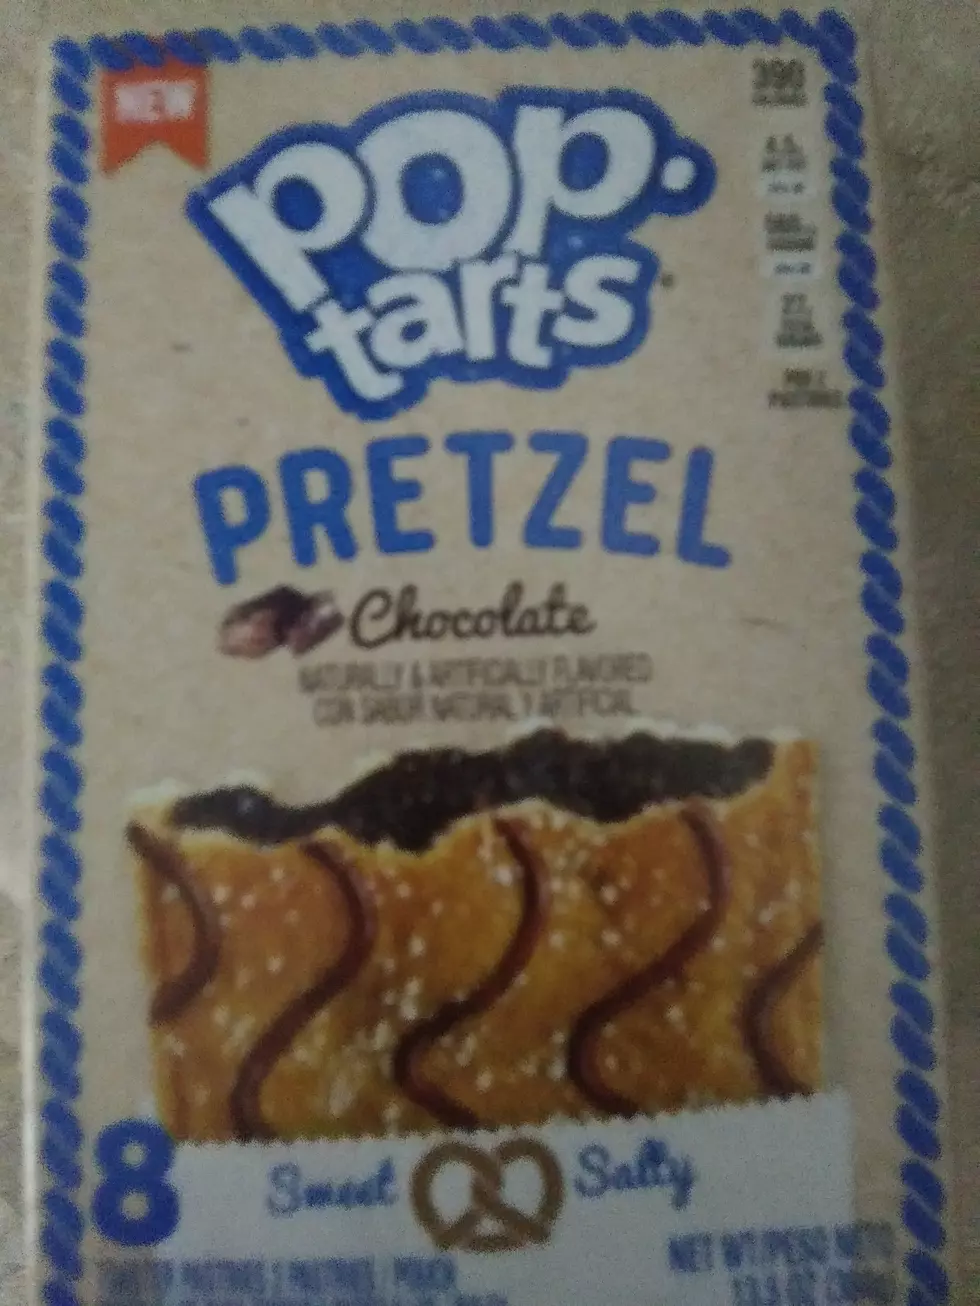 I Tried Salted Pretzel Chocolate Pop Tarts And Had….. Some Thoughts